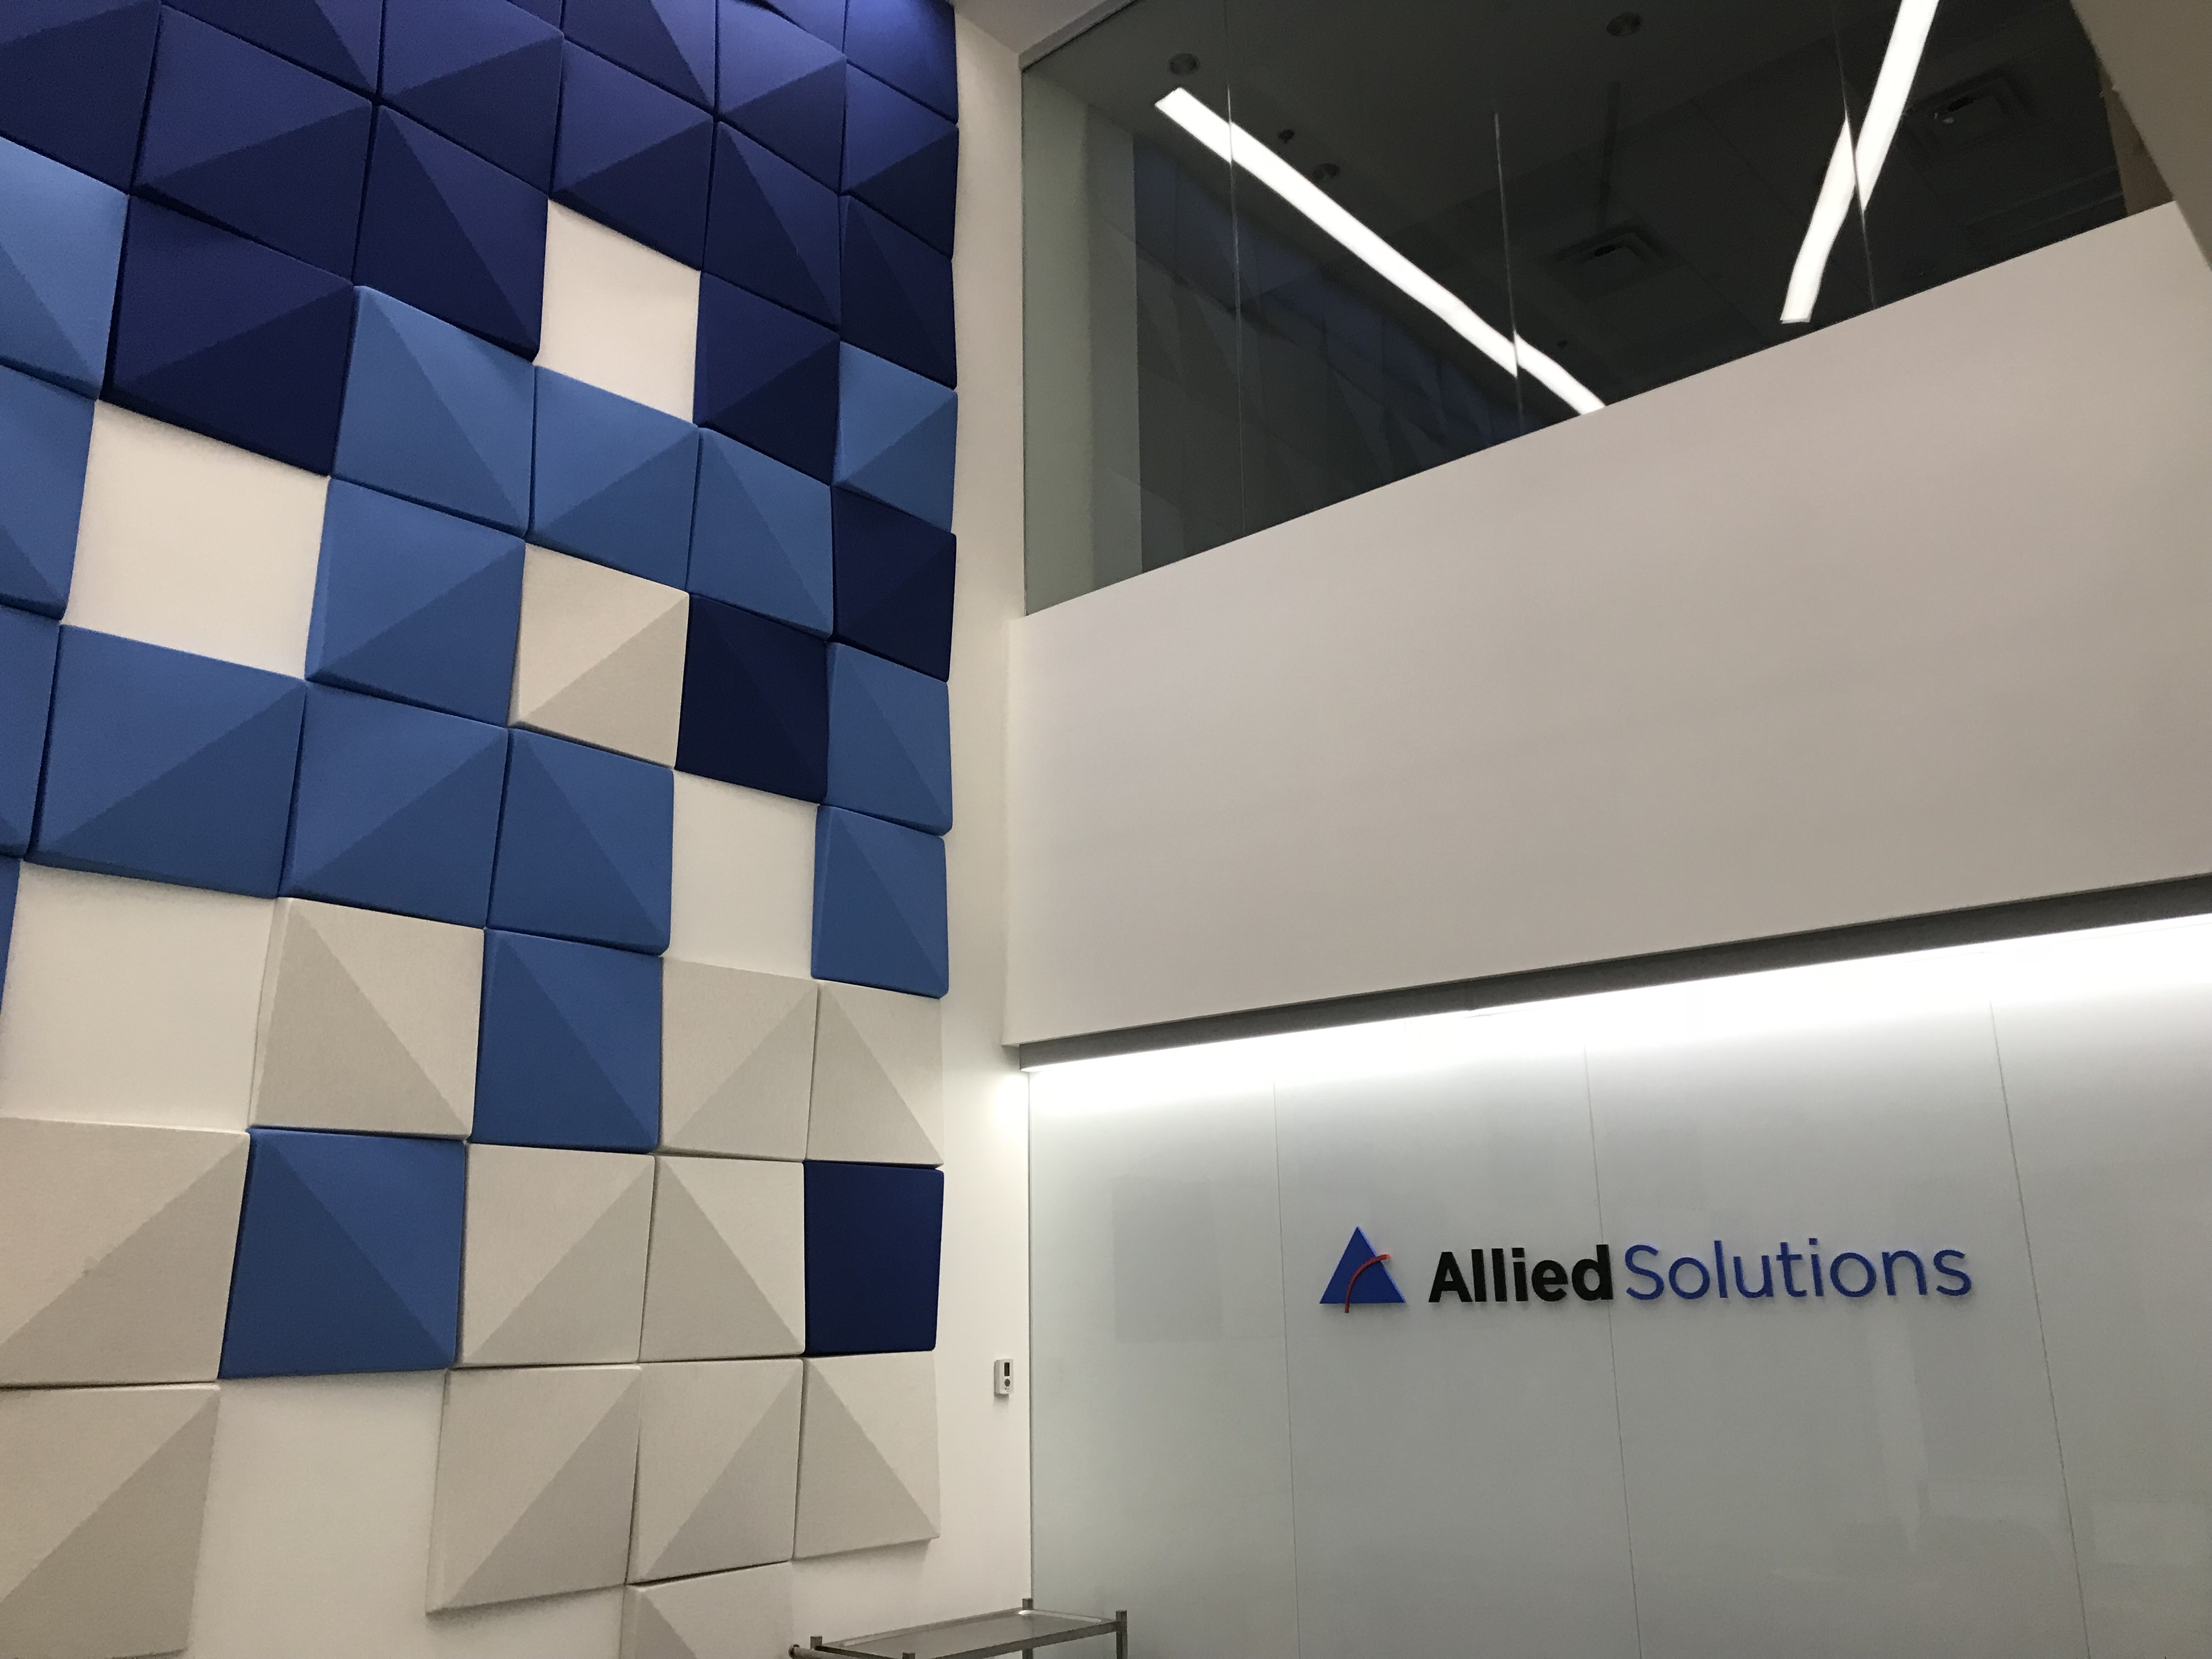 Allied Solutions lobby